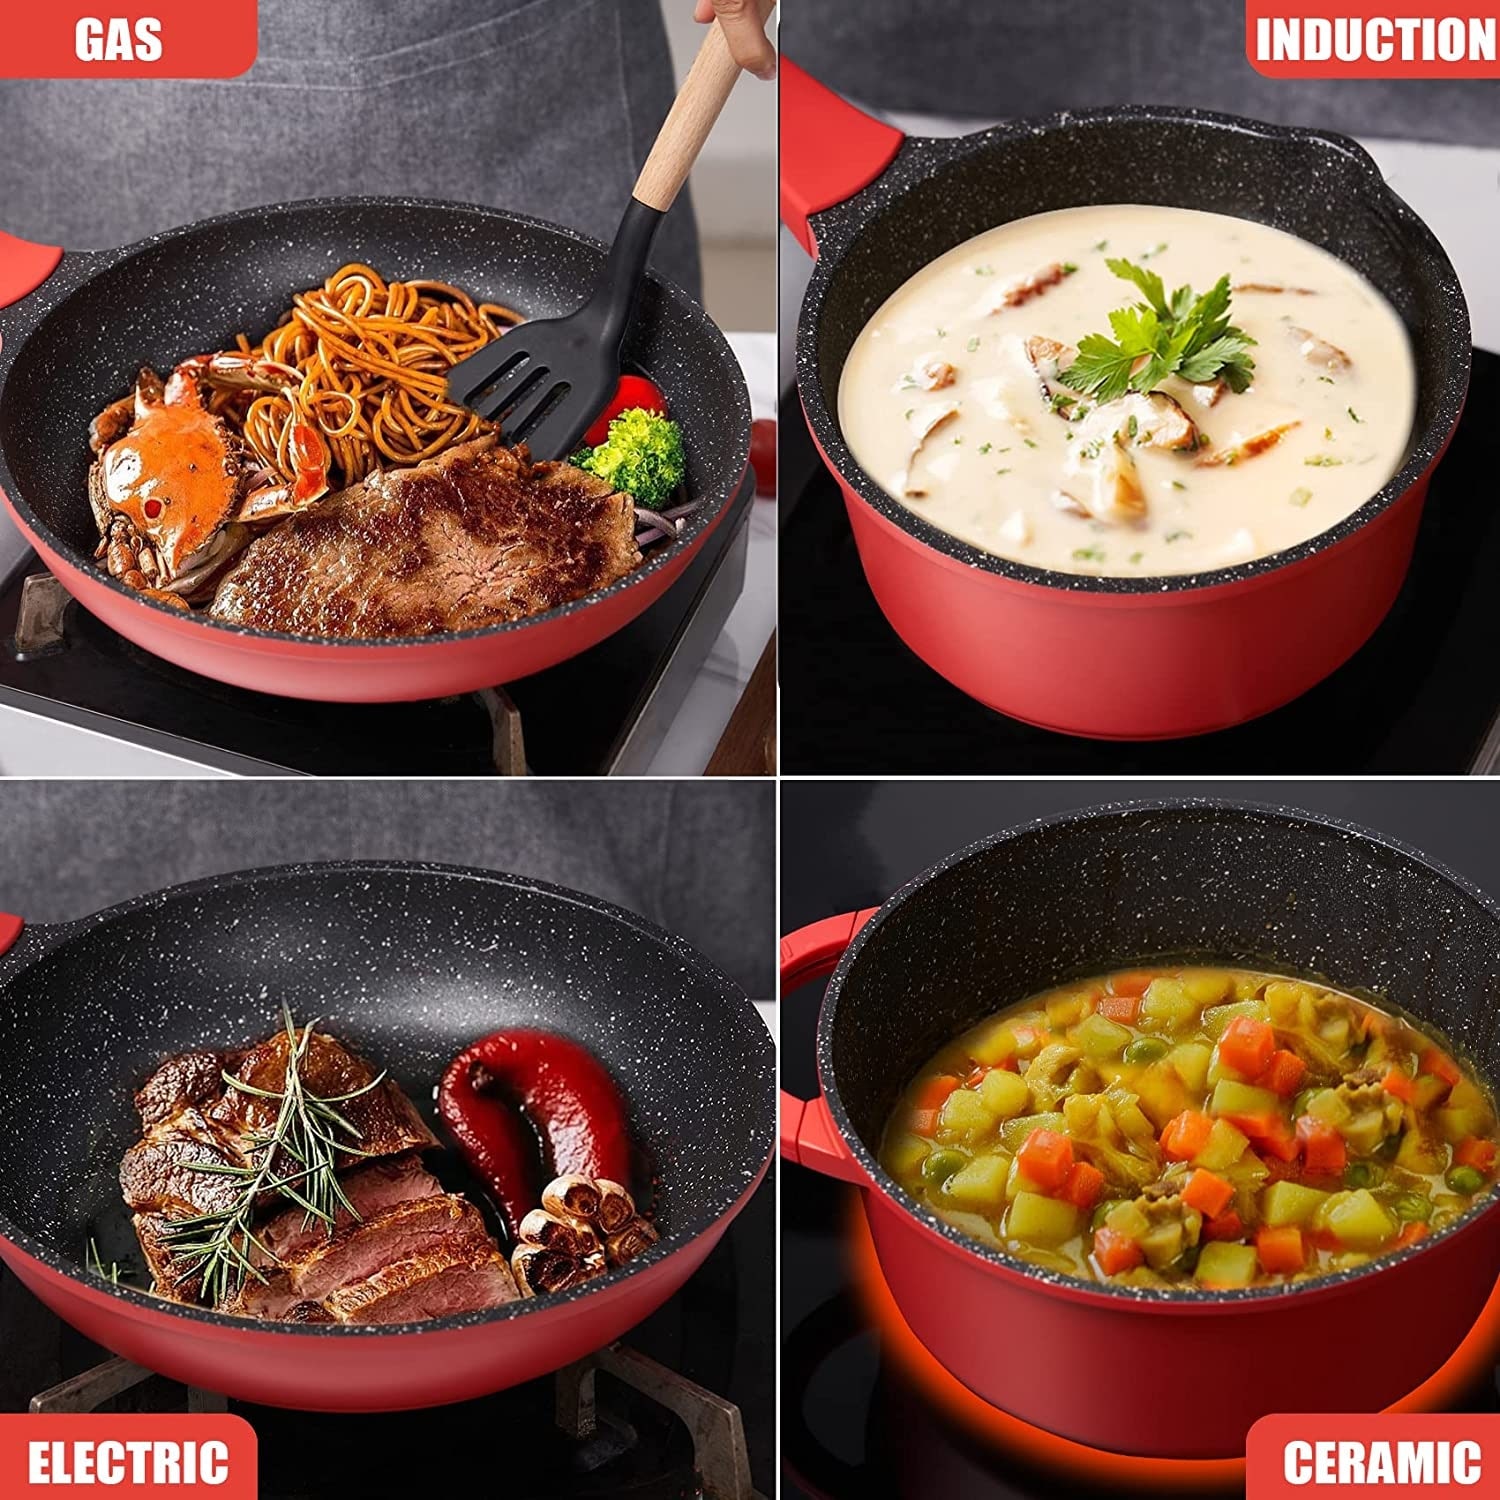 https://ak1.ostkcdn.com/images/products/is/images/direct/43cefa53a4713768d8f952ff1f8161db00369c0b/Pots-and-Pans-Set%2C-Nonstick-16-Pieces%2C-Cookware-Sets-with-Granite-Coating%2C-Kitchen-Cookware-Set-Suitable-for-All-Cooktop.jpg